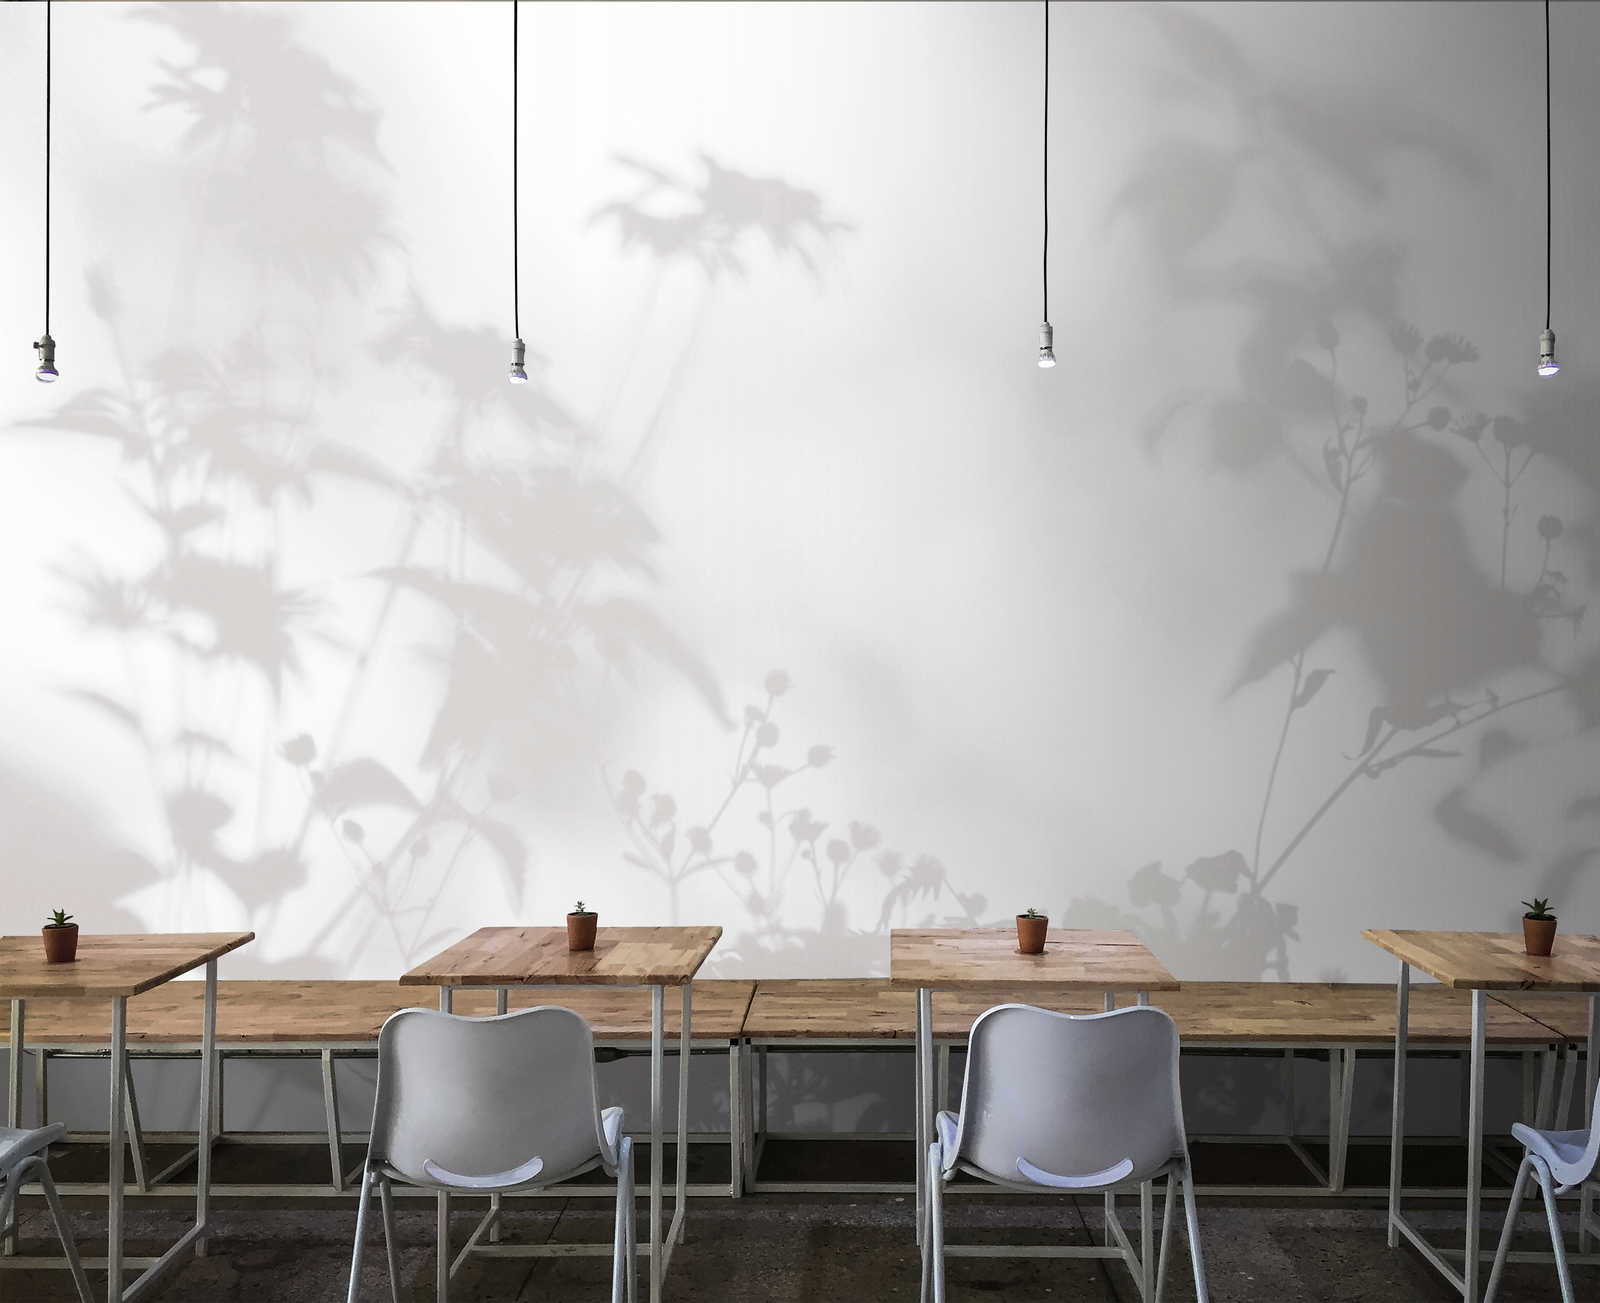             Shadow Room 2 - nature photo wallpaper grey & white, faded design
        